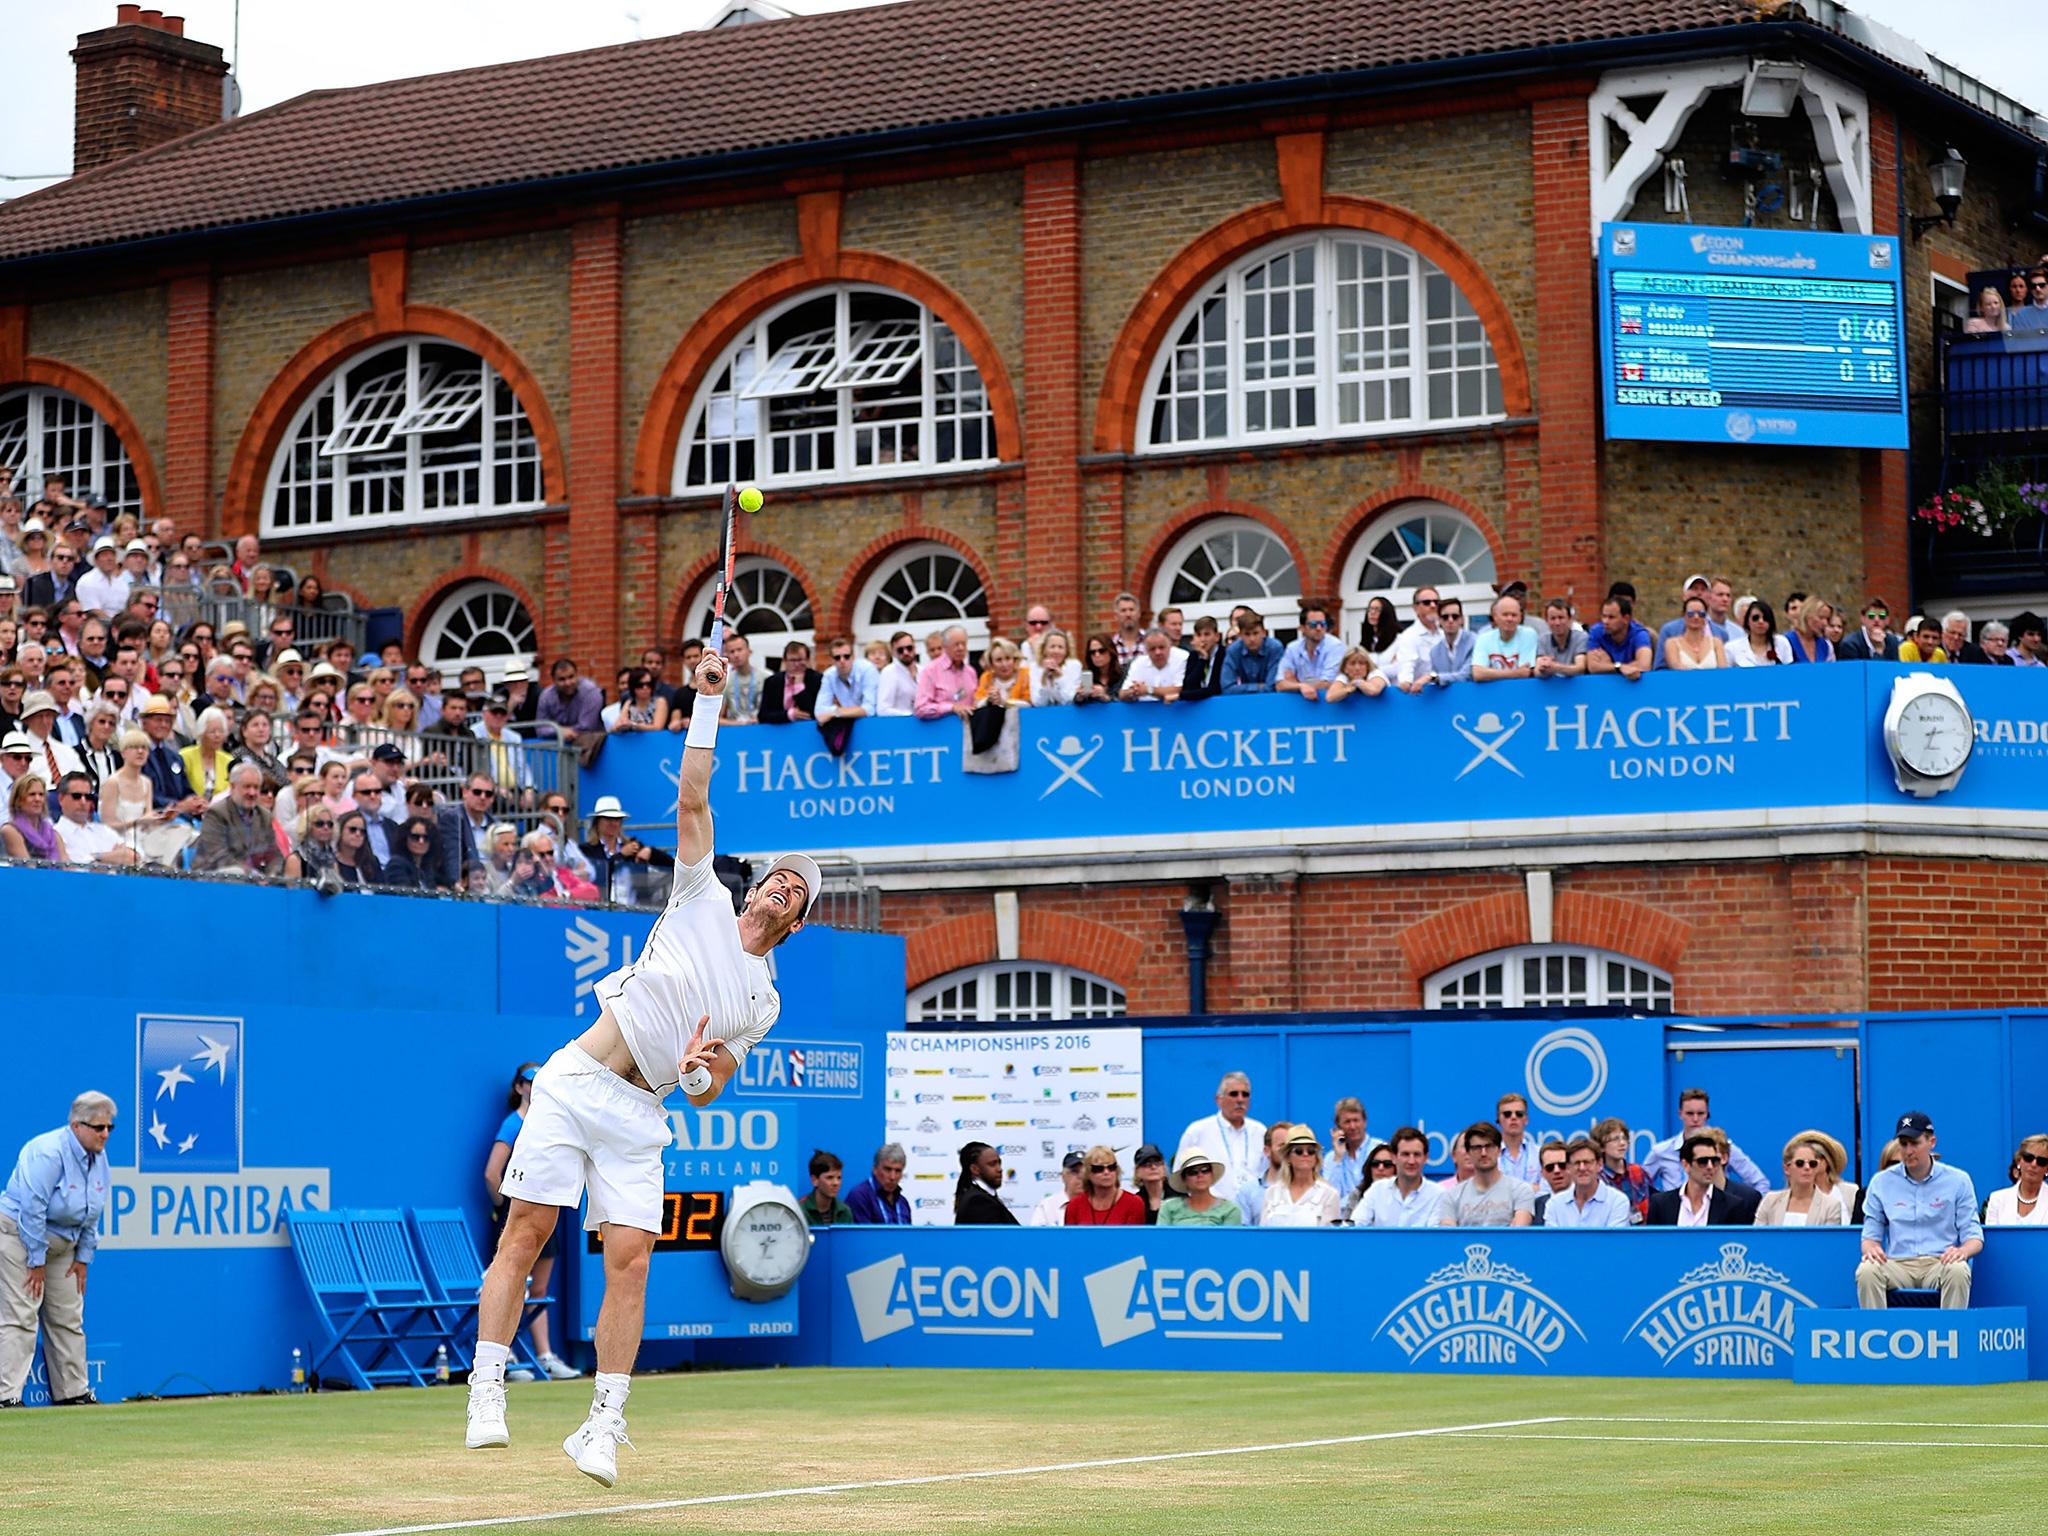 Murray serving in the match's final game at Queen's